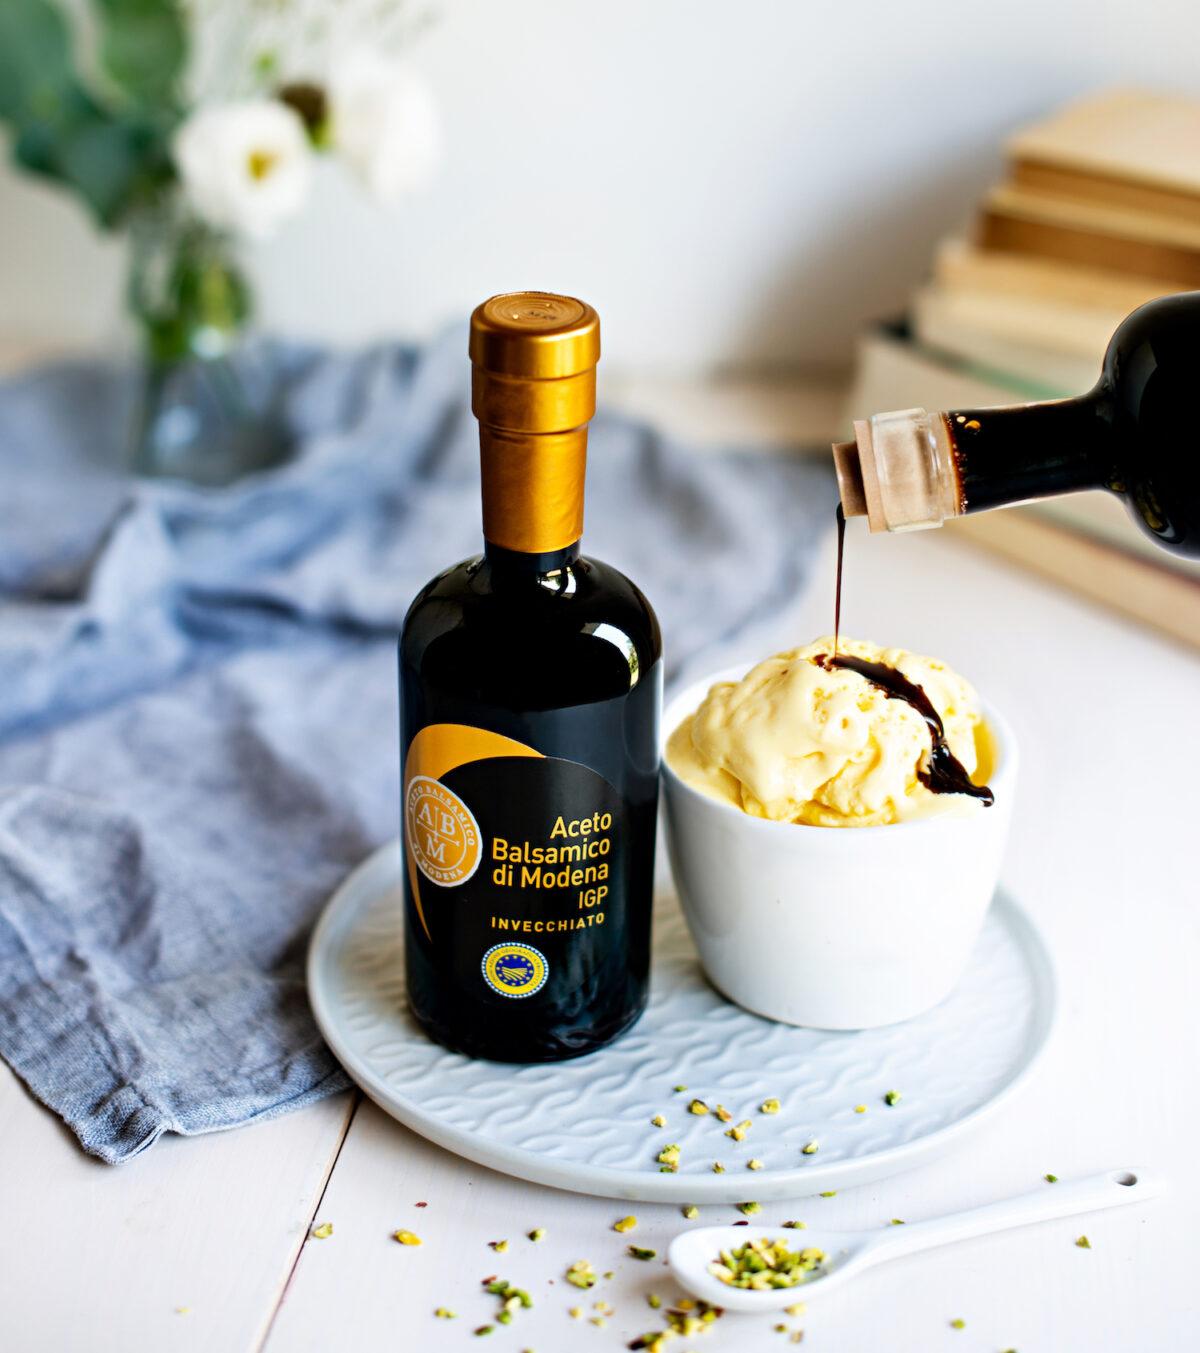 A thick, aged variety of Balsamic Vinegar of Modena can be drizzled directly over fresh fruits and desserts. (Courtesy of the Consortium for the Protection of Balsamic Vinegar of Modena)